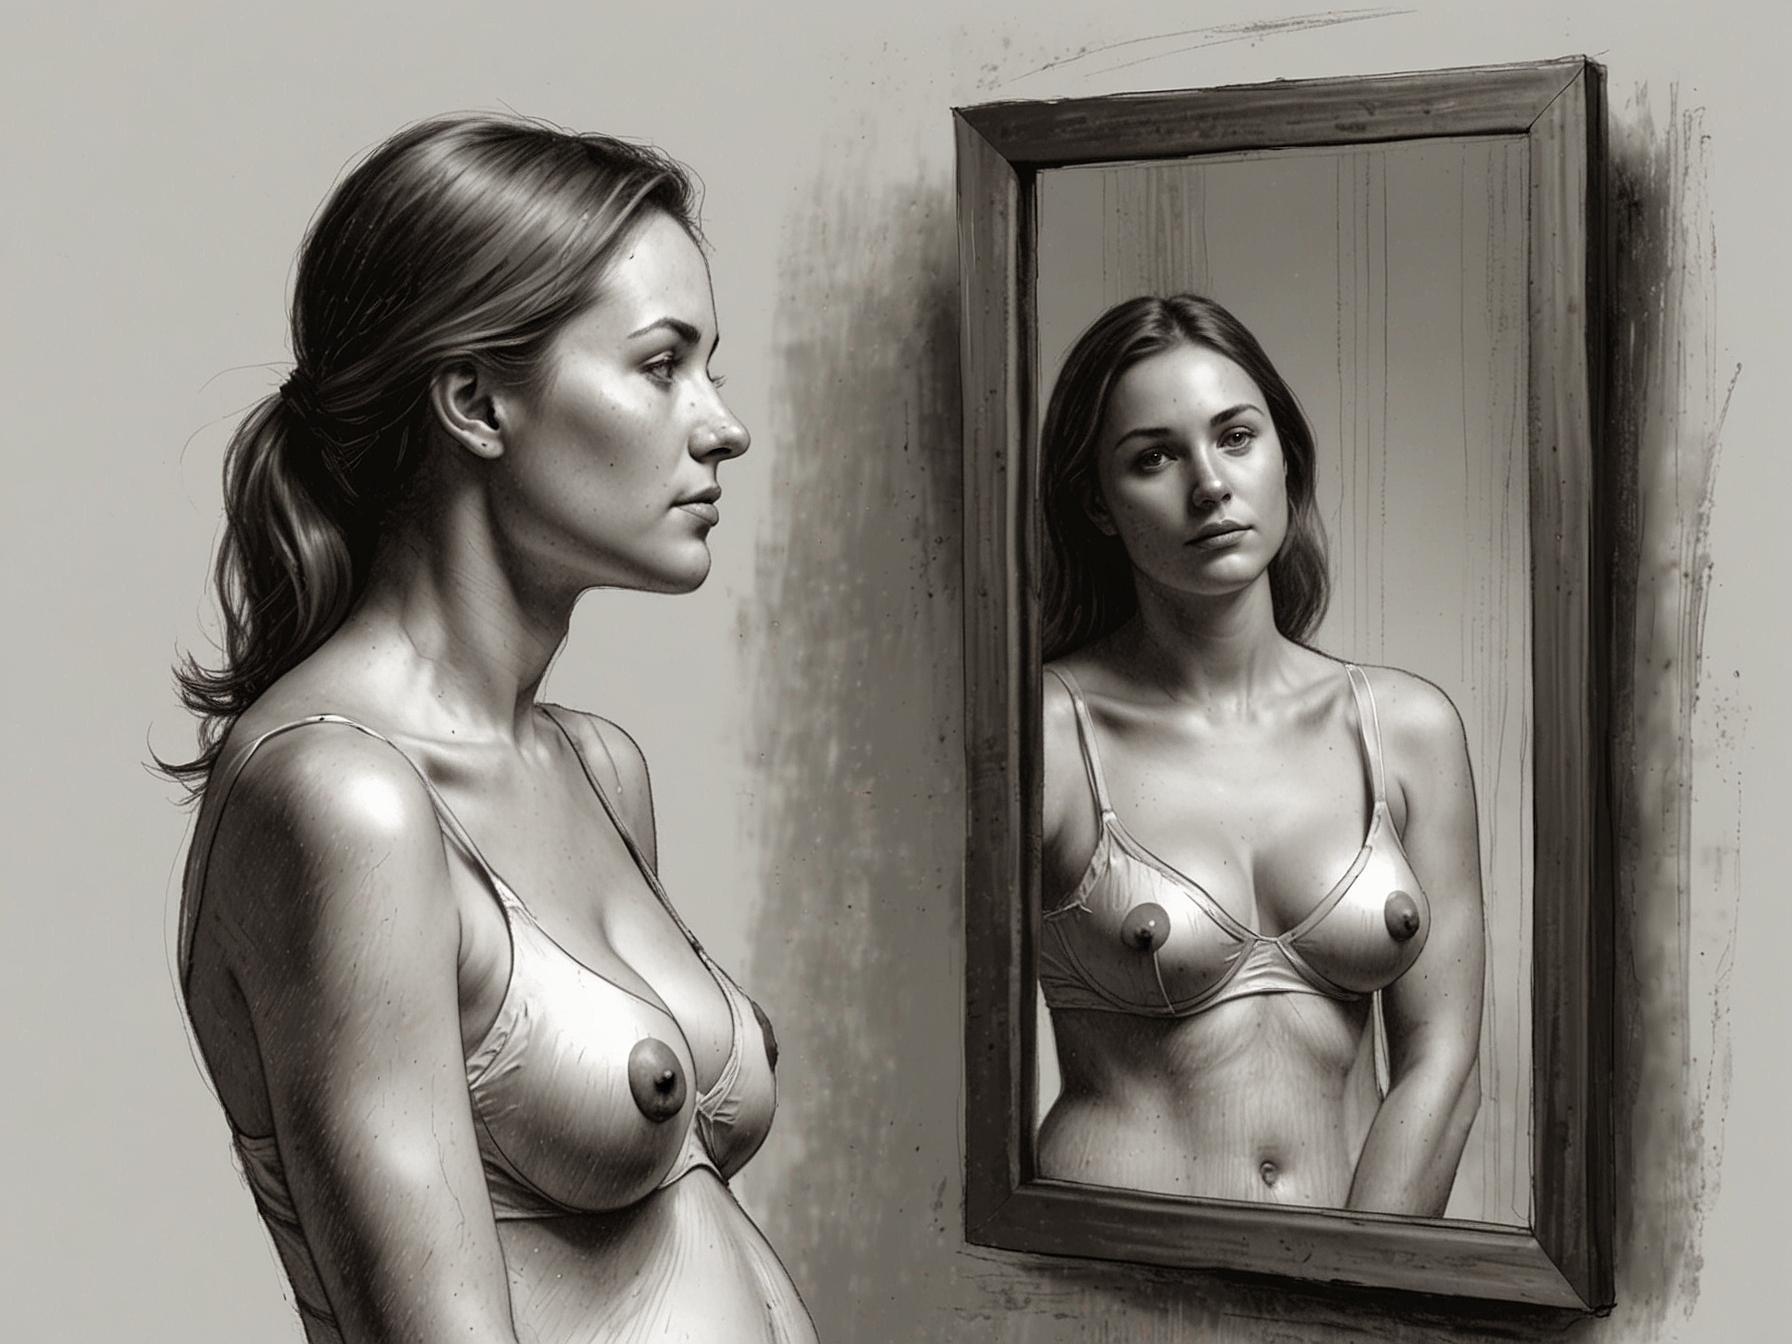 A new mother looking at herself in the mirror, contemplating the changes in her breasts after pregnancy, symbolizing the emotional aspect of postpartum body image.